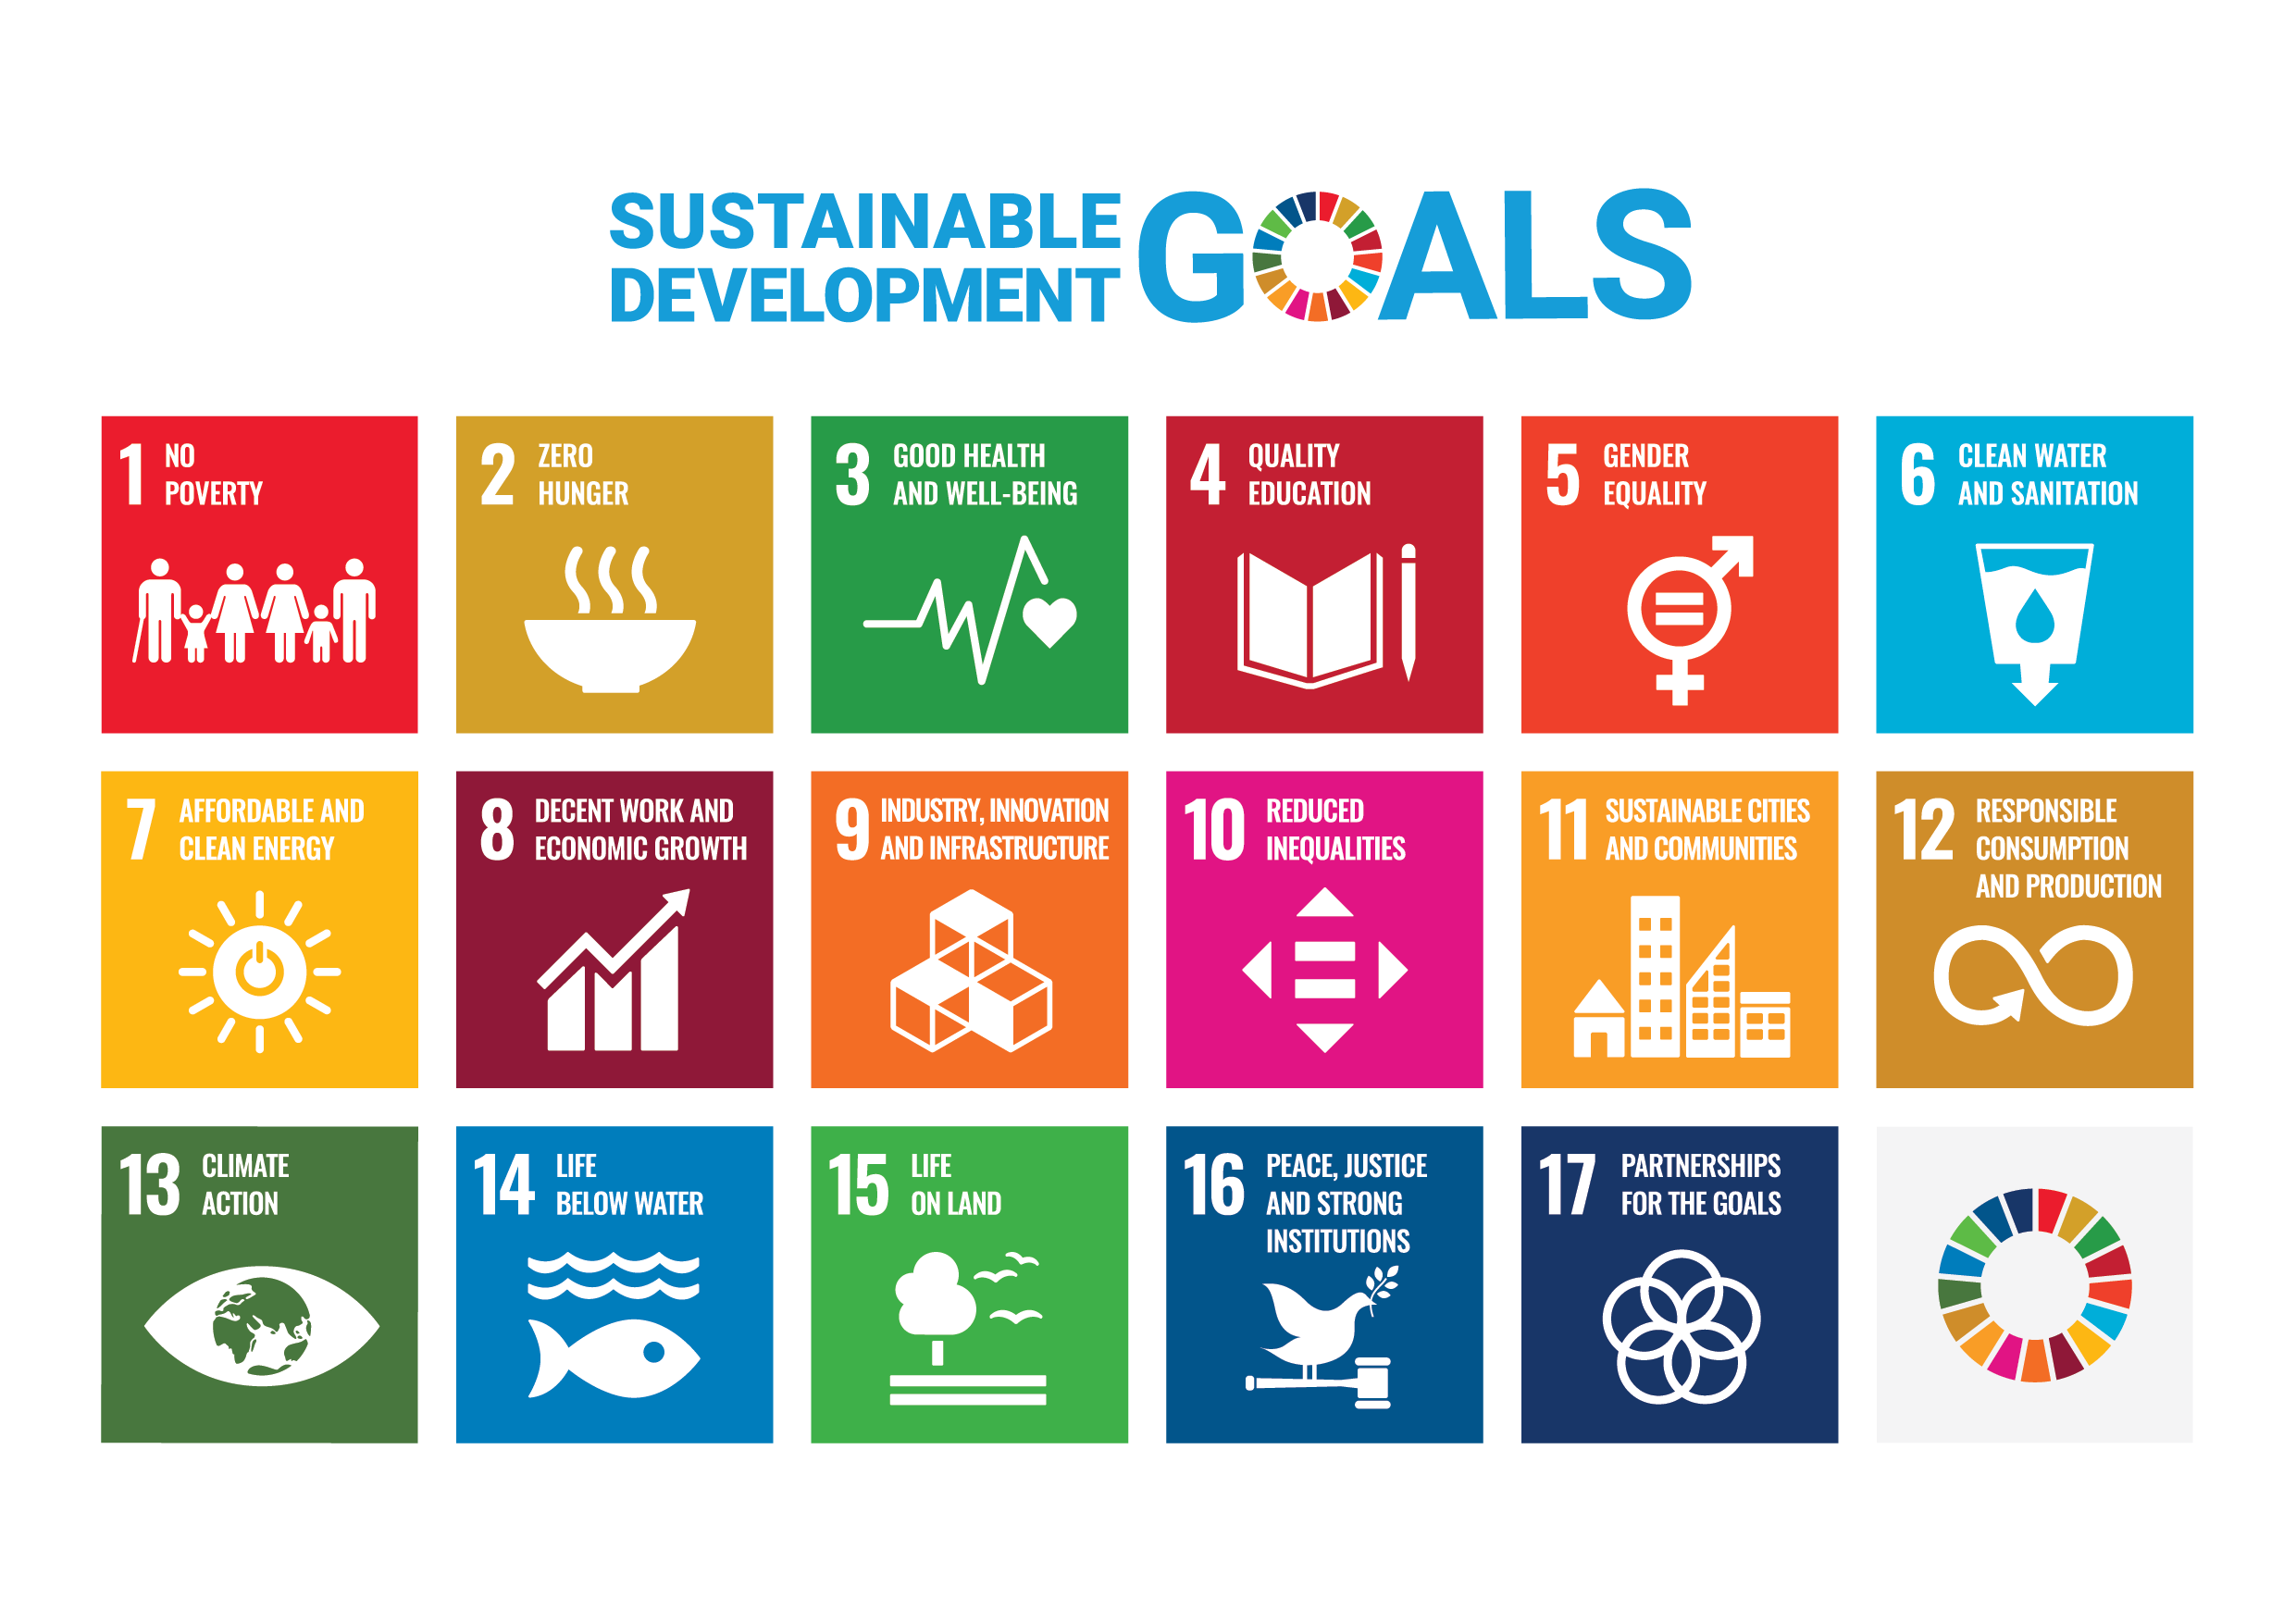 Image of the 17 global goals.